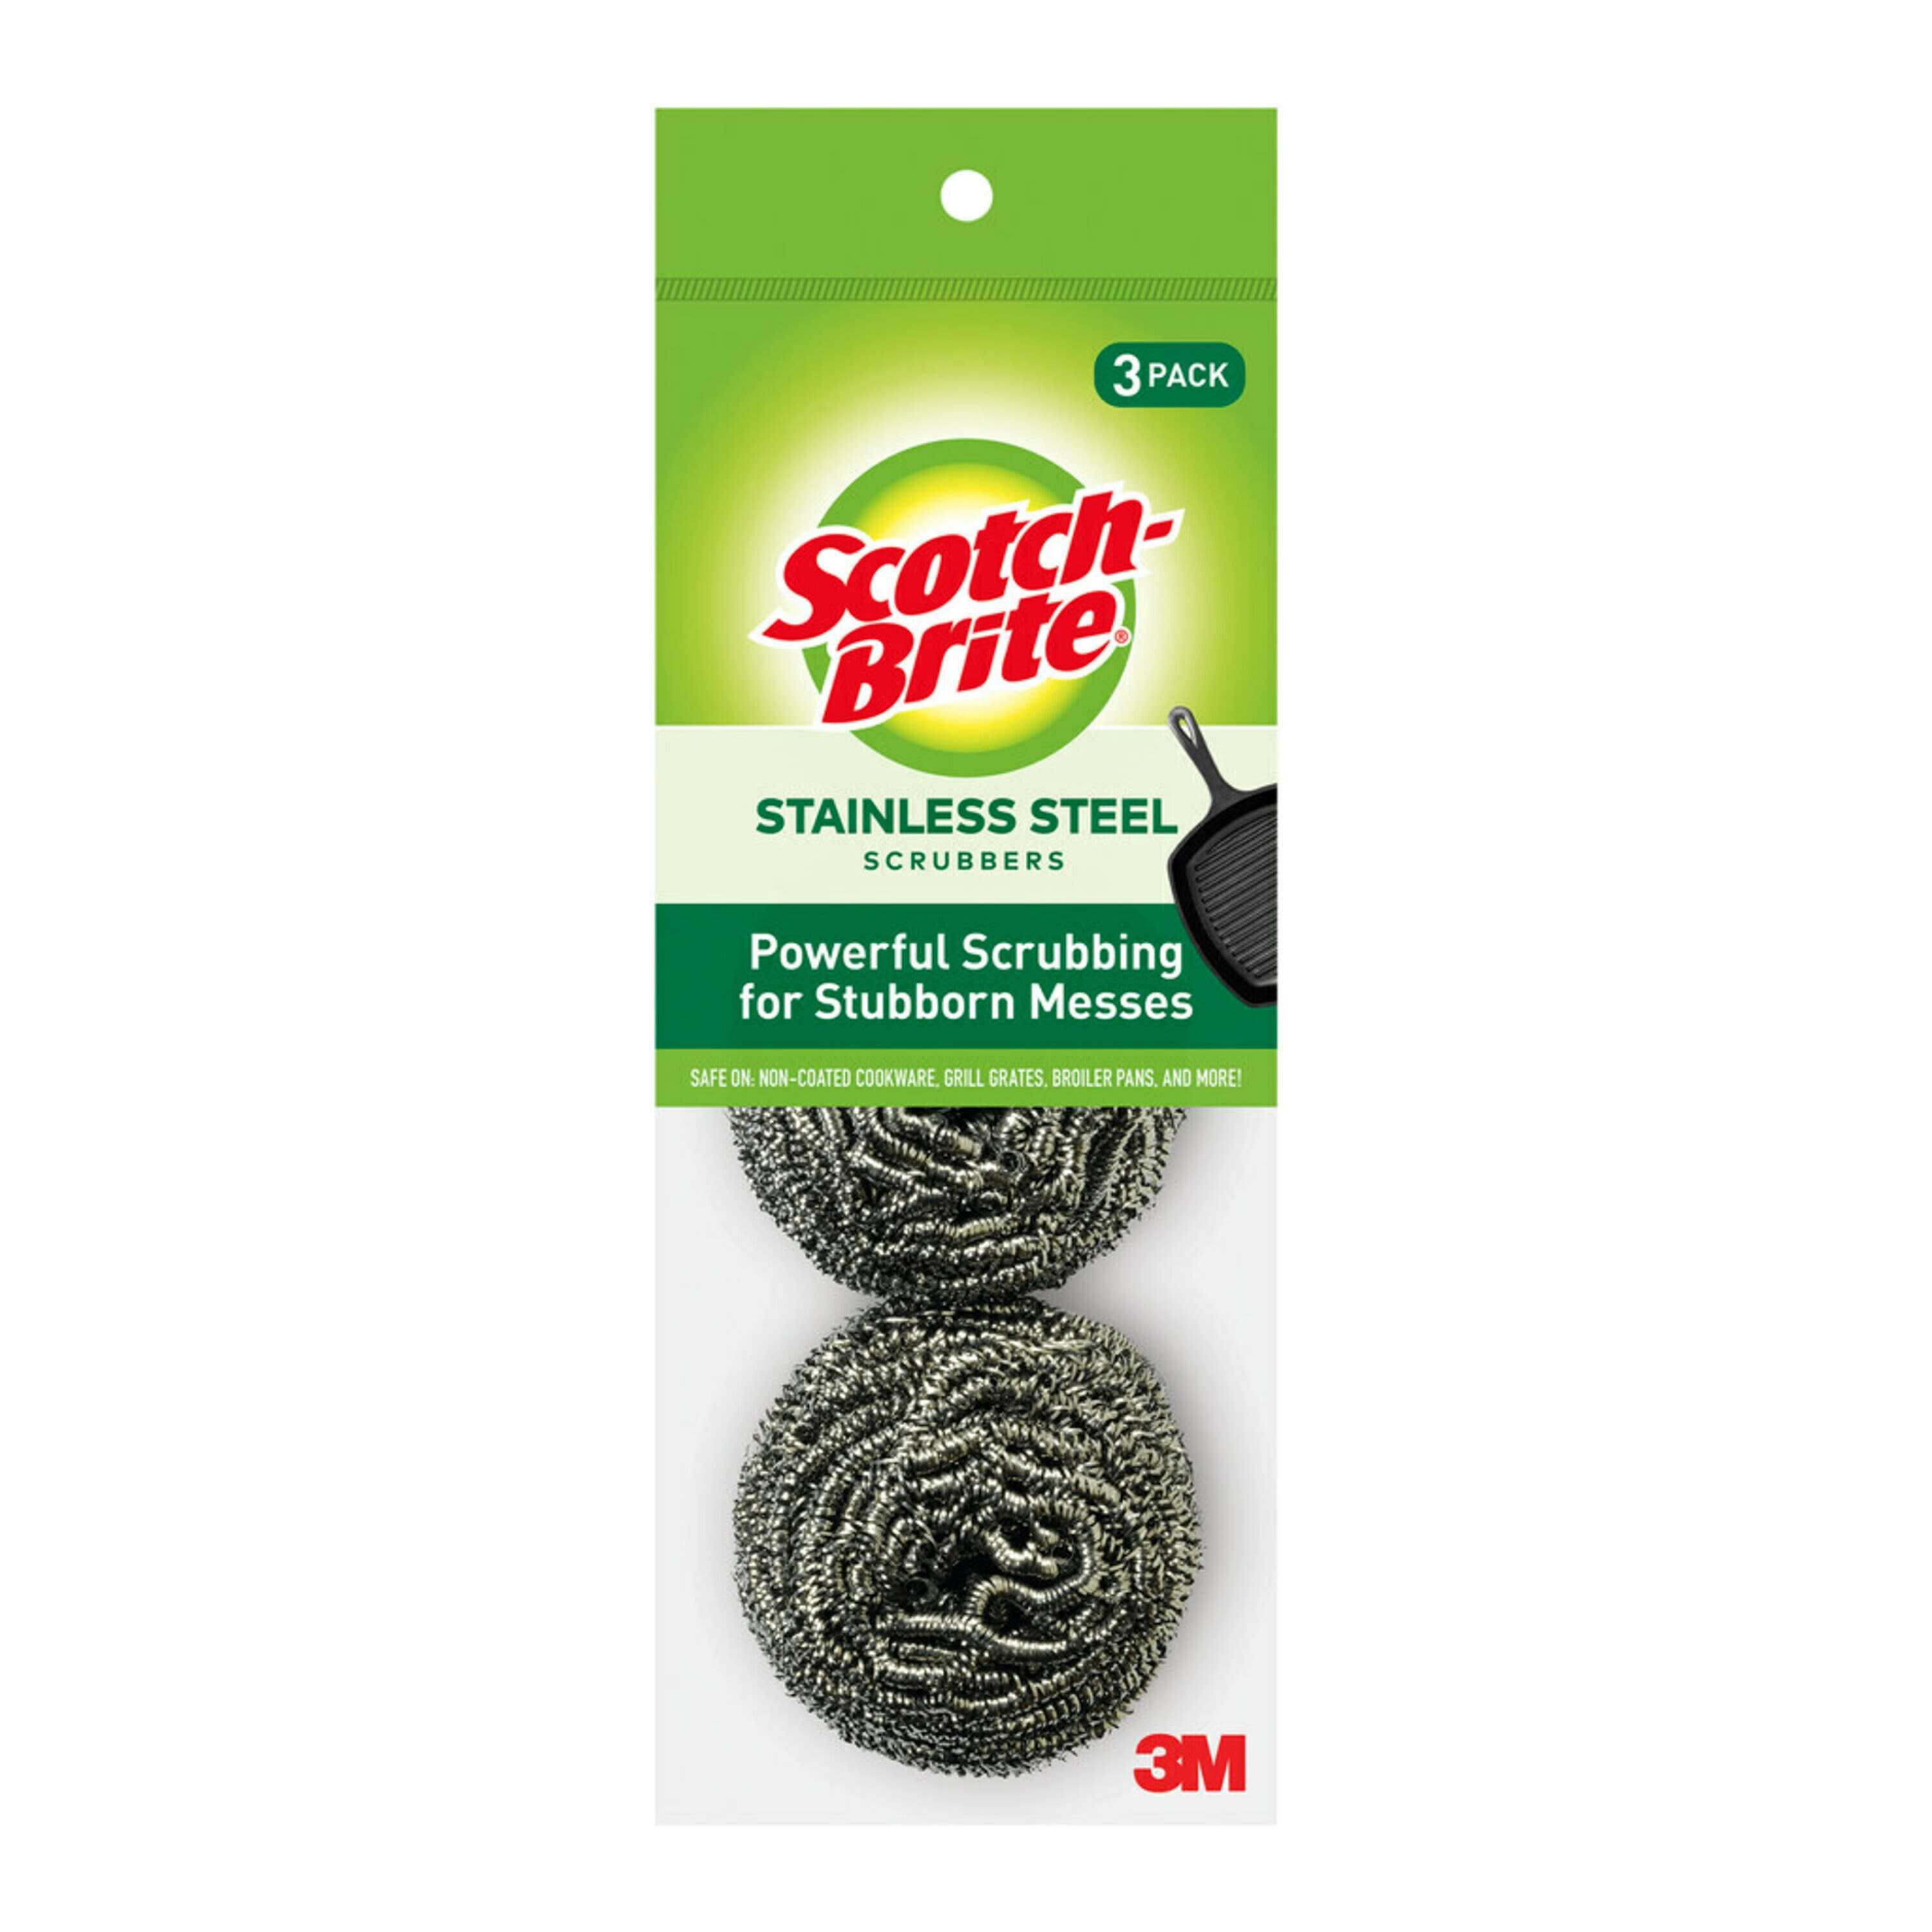 Scotch-Brite Stainless Steel Scrubbers, 3 Scrubbers - image 1 of 9